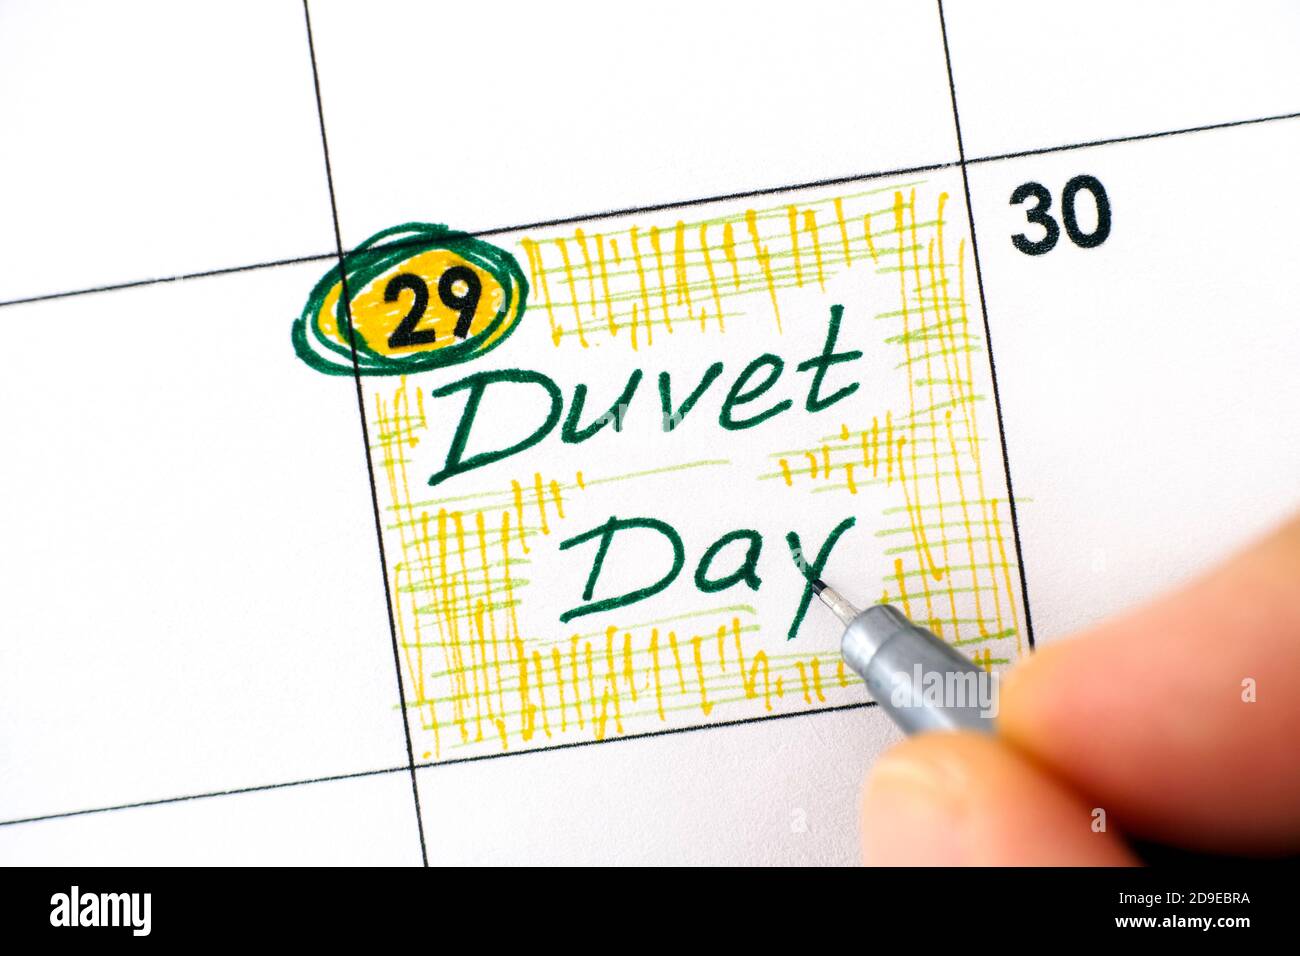 Woman fingers with pen writing reminder Duvet Day in calendar. Stock Photo